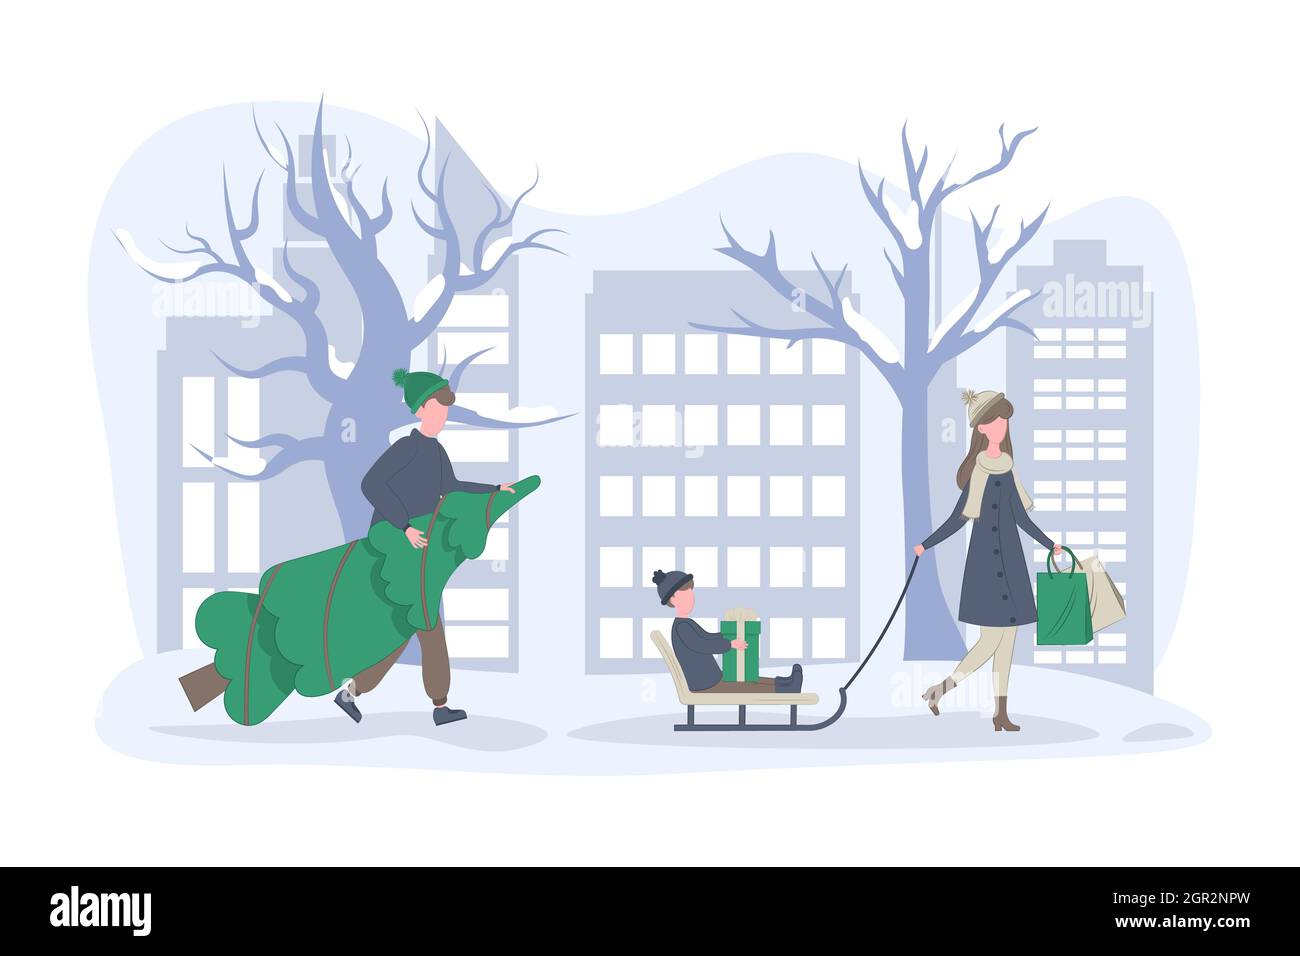 Family Christmas shopping and winter holidays. A man carries a Christmas tree and a woman sledding a child. Vector flat illustration. Stock Vector